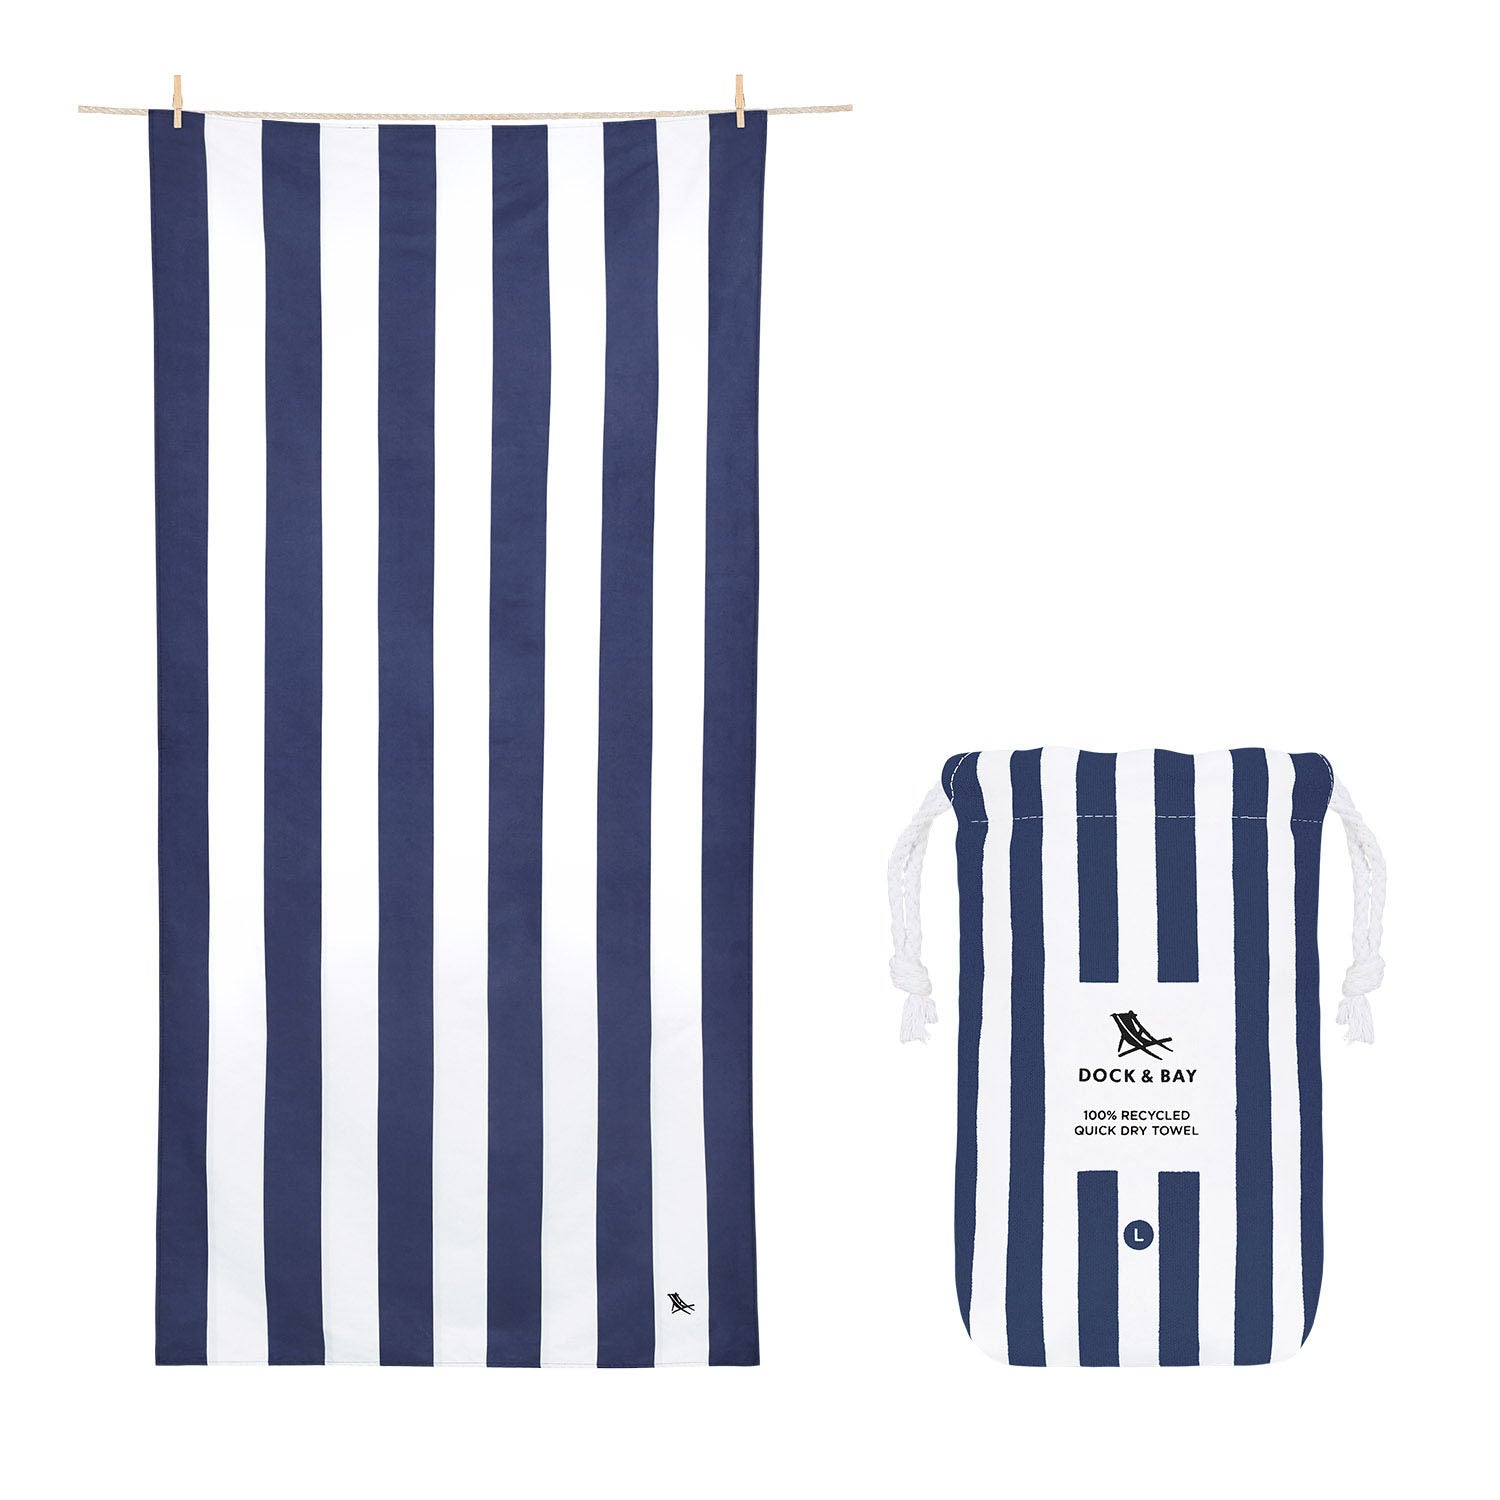 Navy and white striped cabana towel from dock and bay